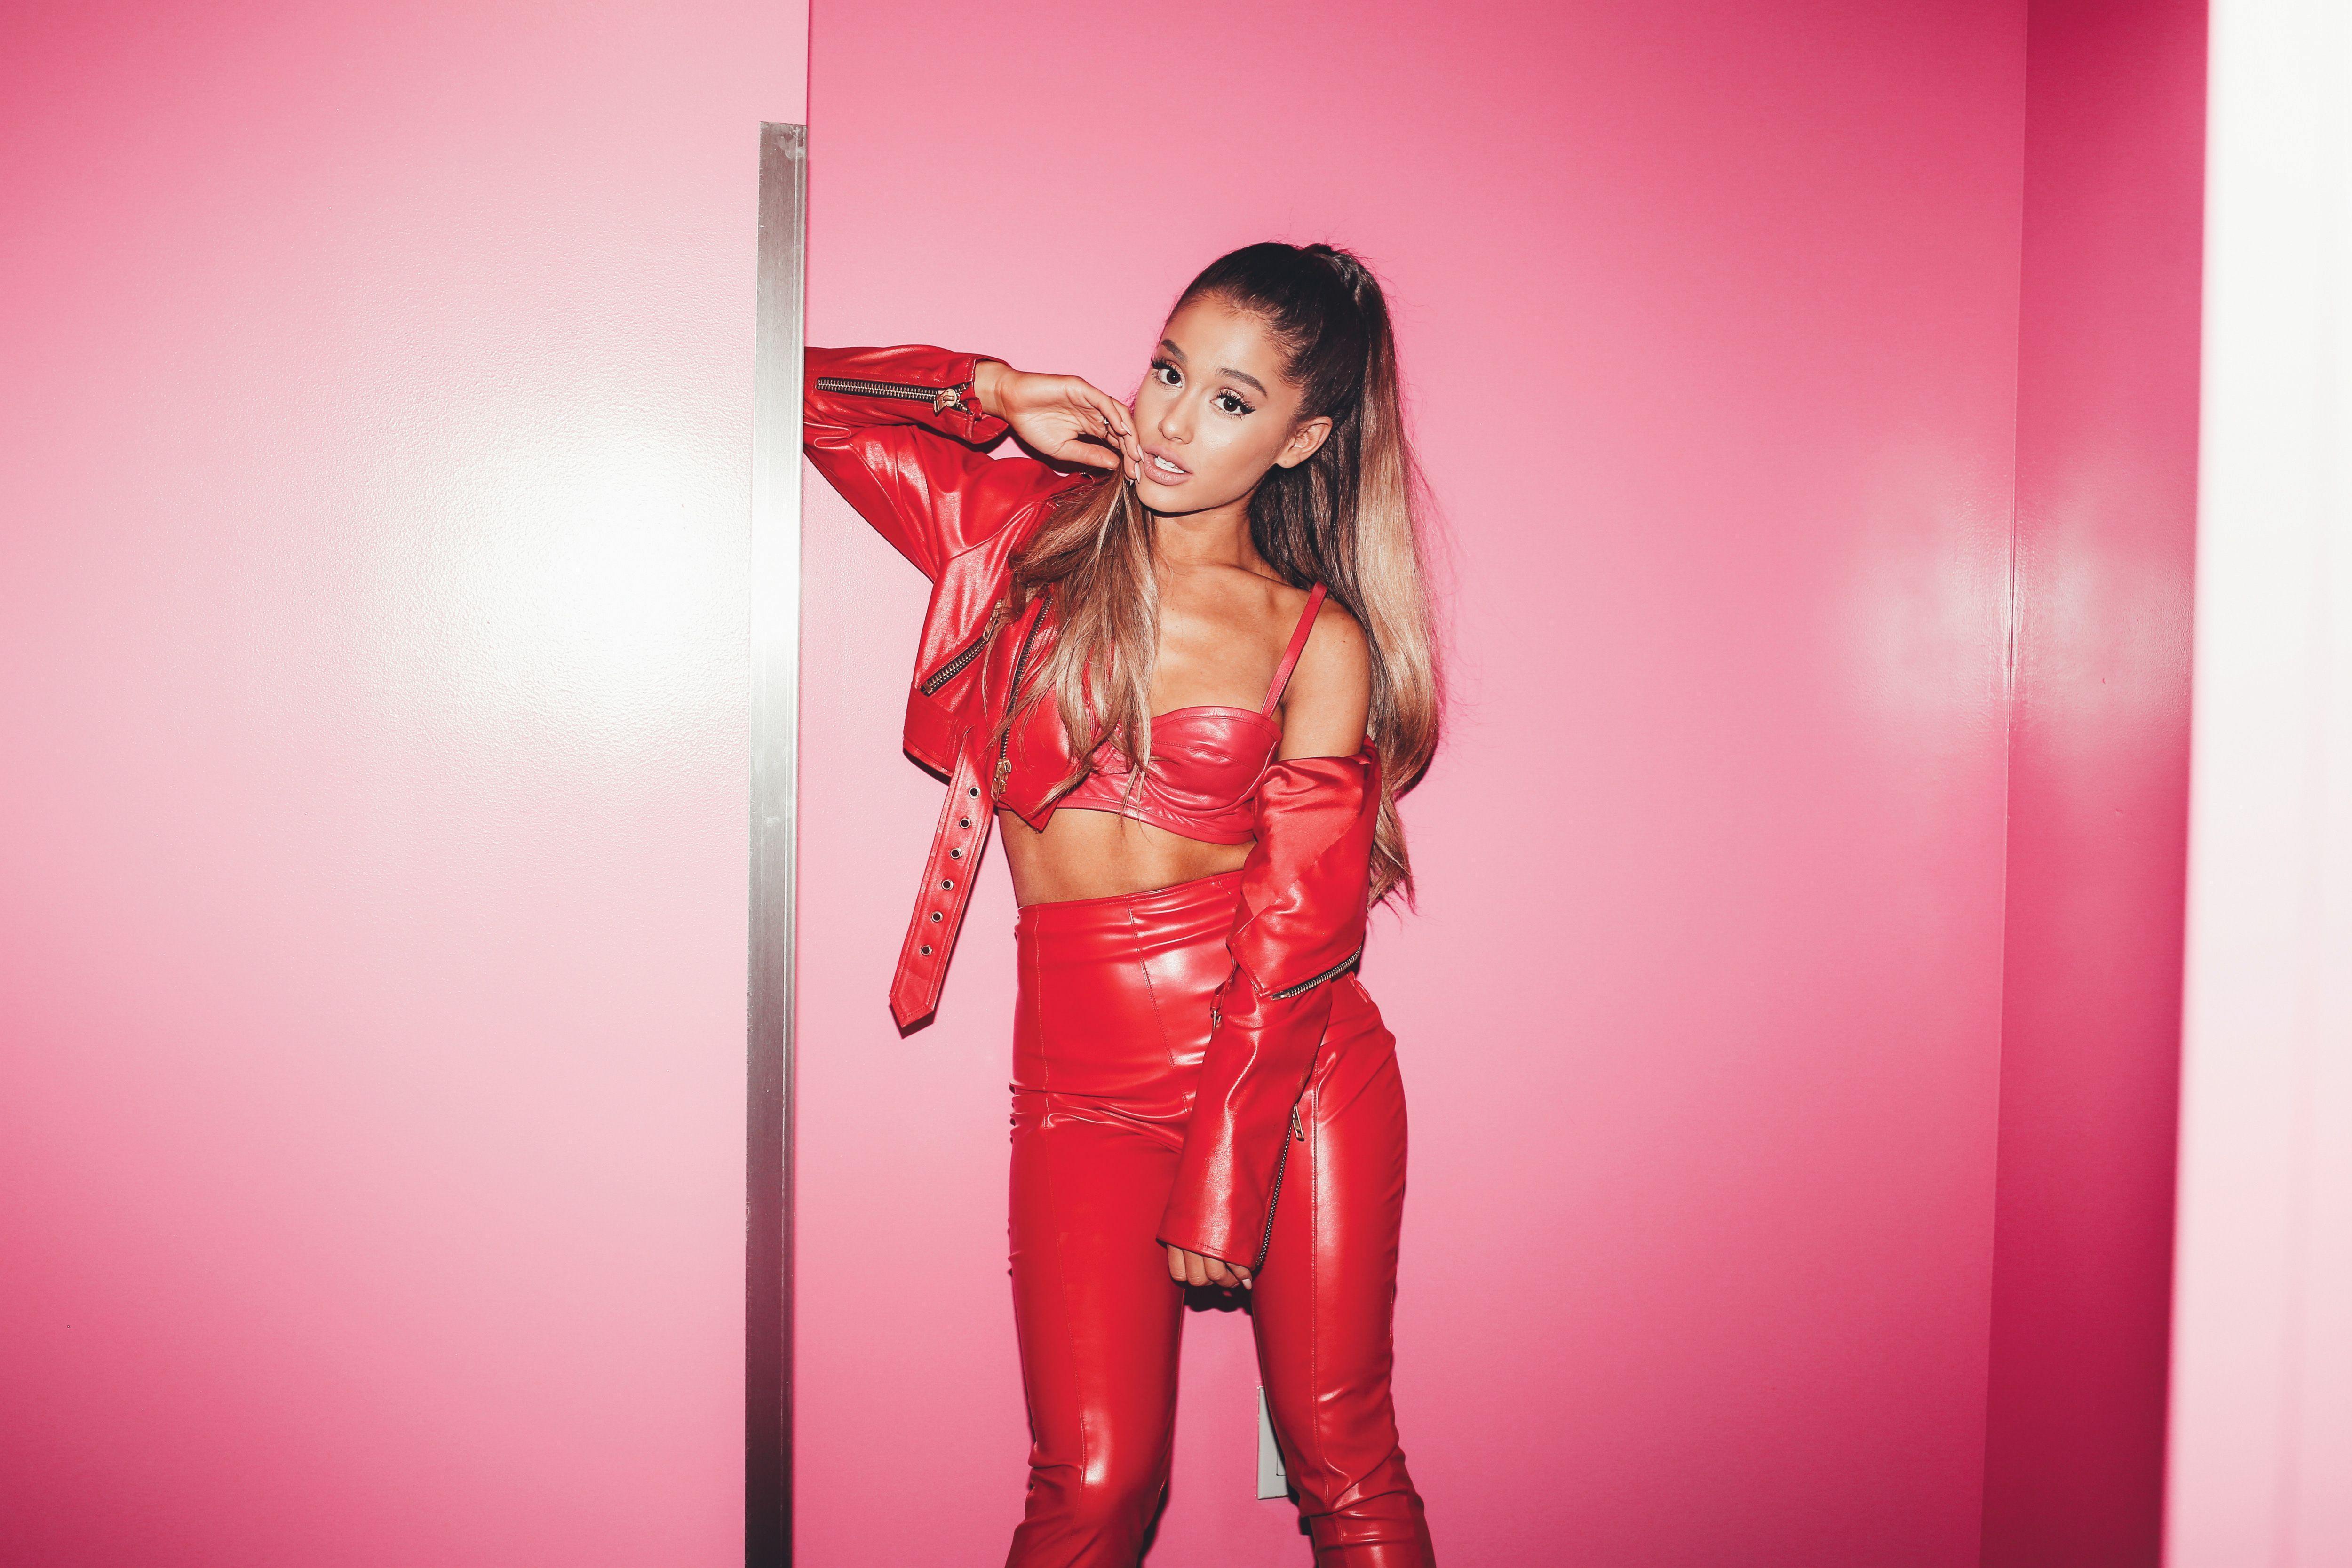 Ariana Grande Wallpaper Collection For Free Download. HD